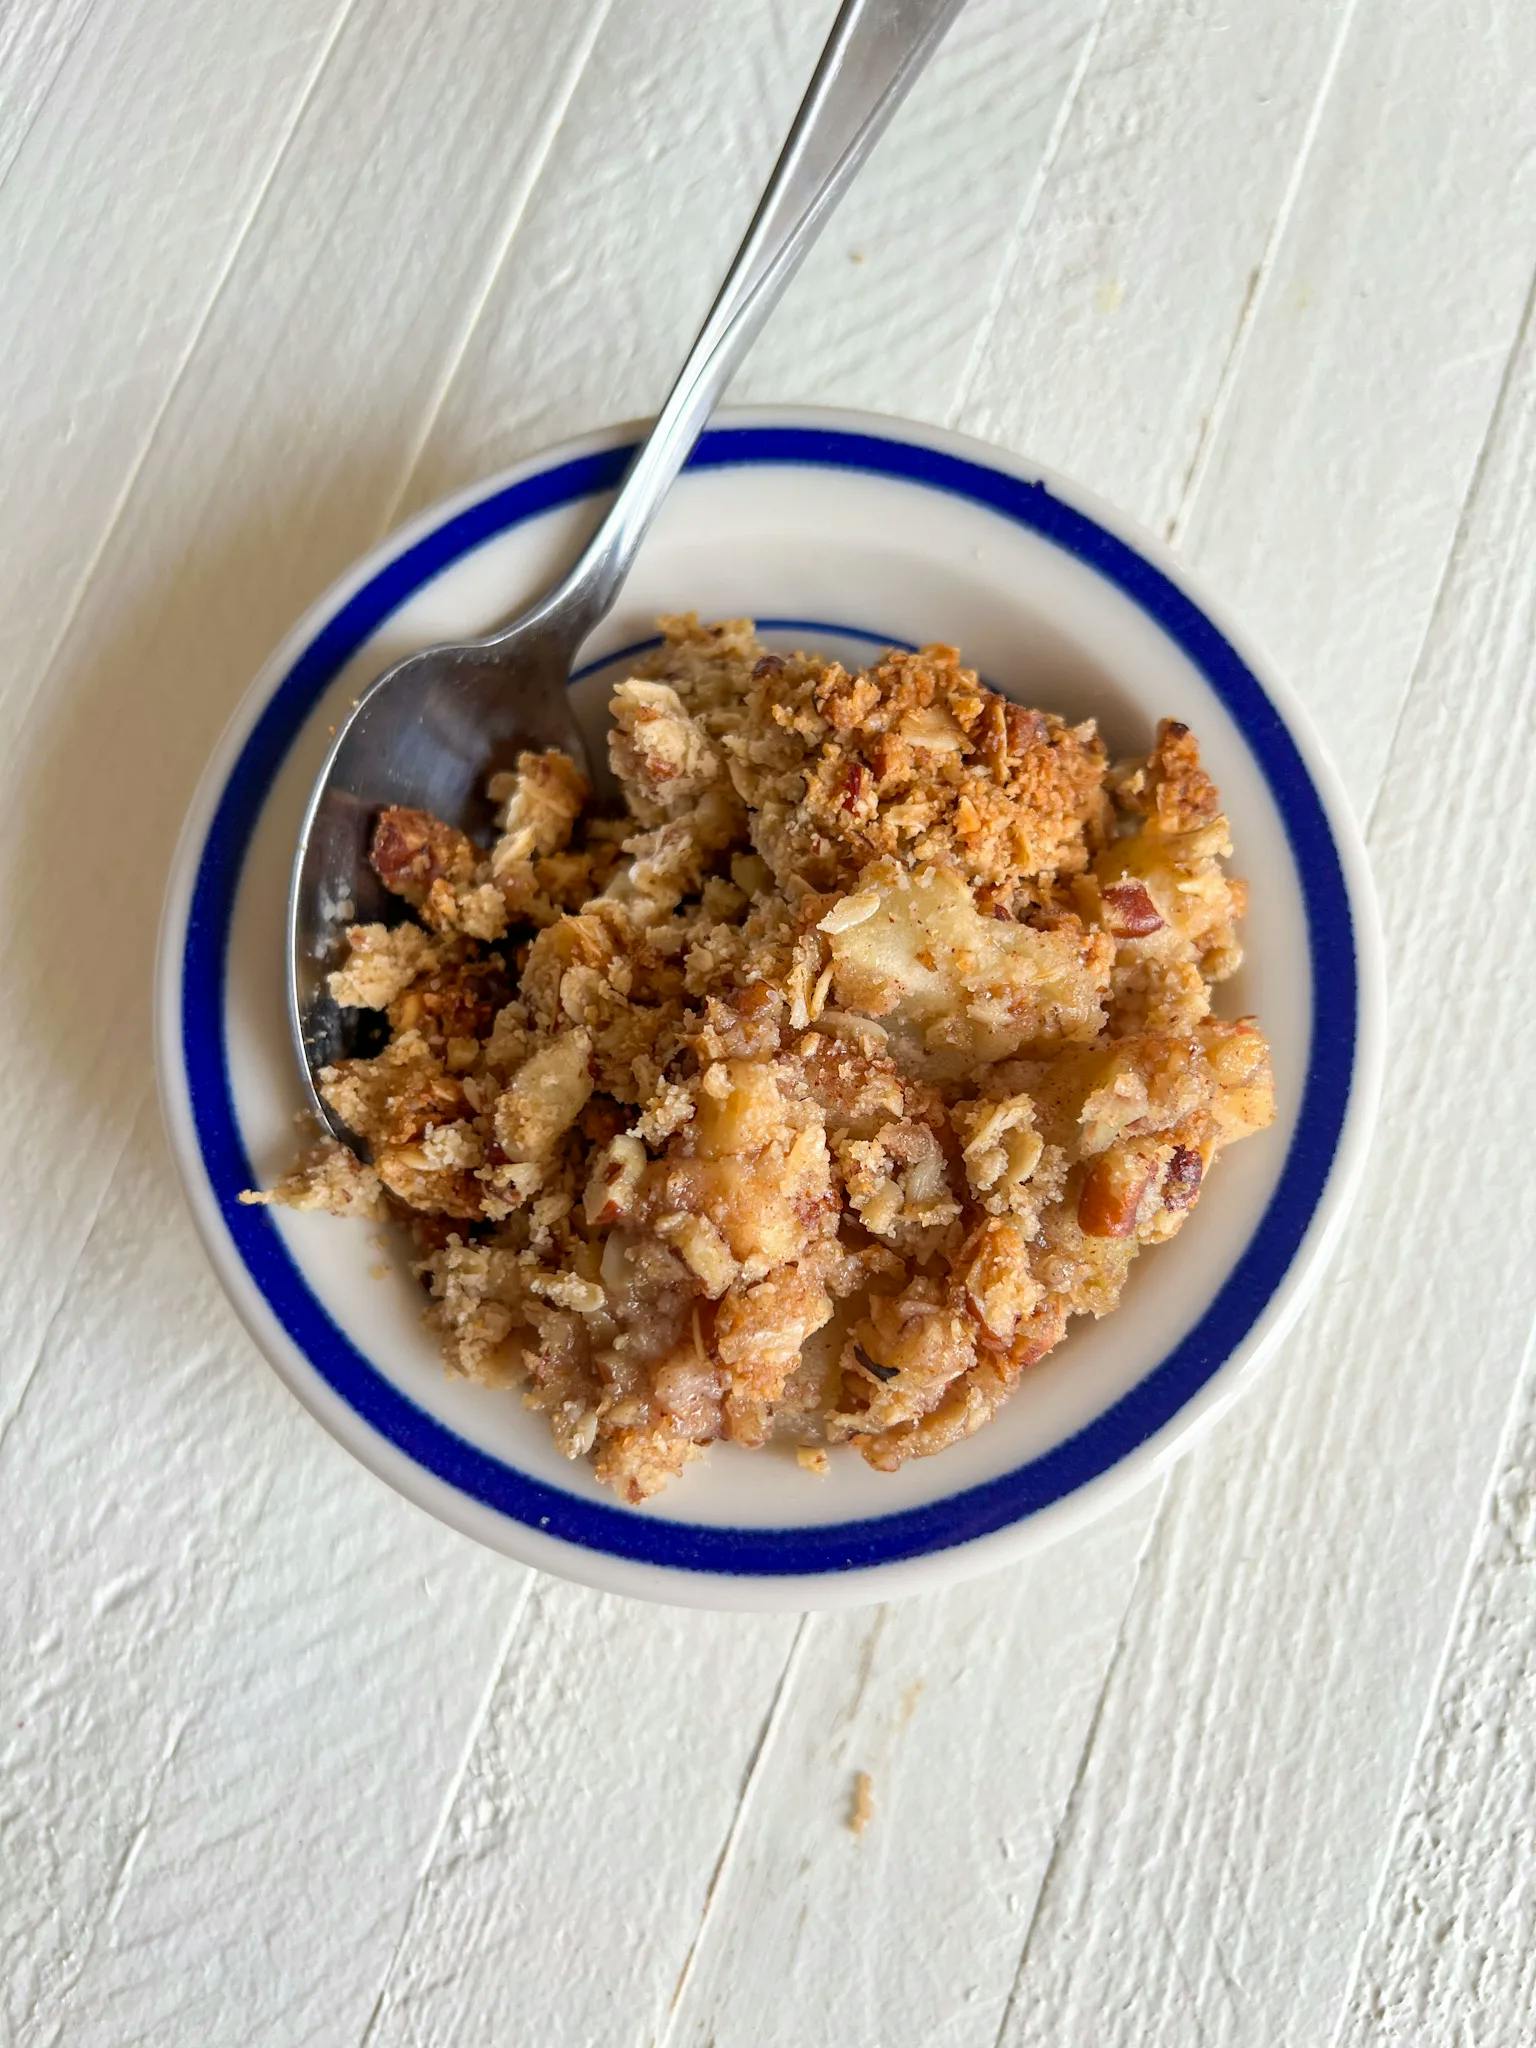 Picture for Gluten Free Apple Crumble